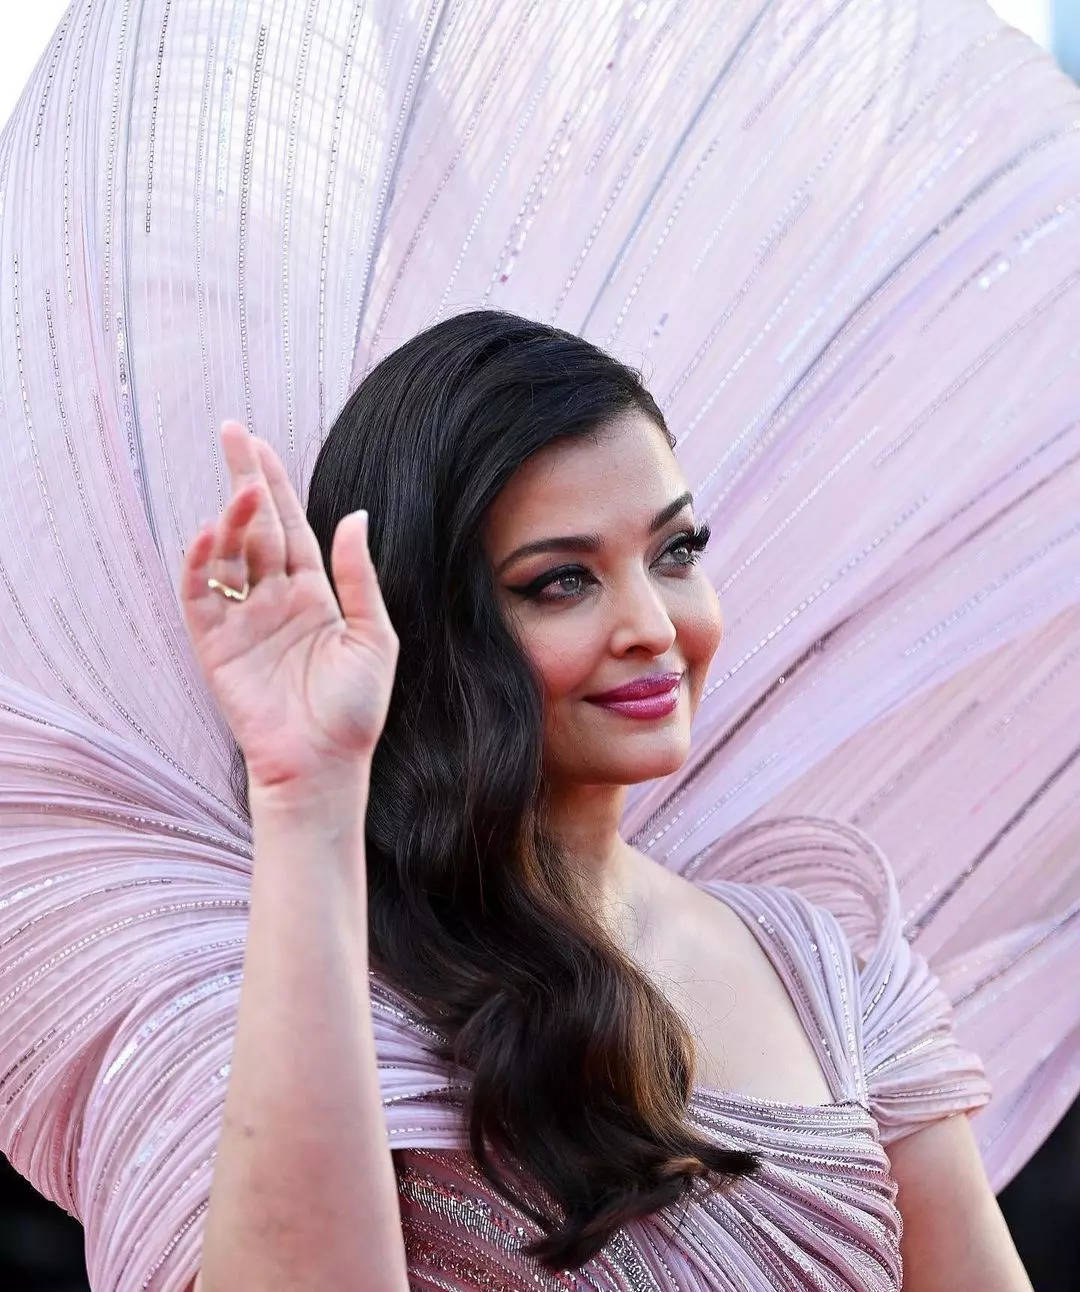 Photos: Aishwarya Rai Bachchan dons a stunning sculpted gown as she walks the red carpet of Cannes 2022 - Times of India